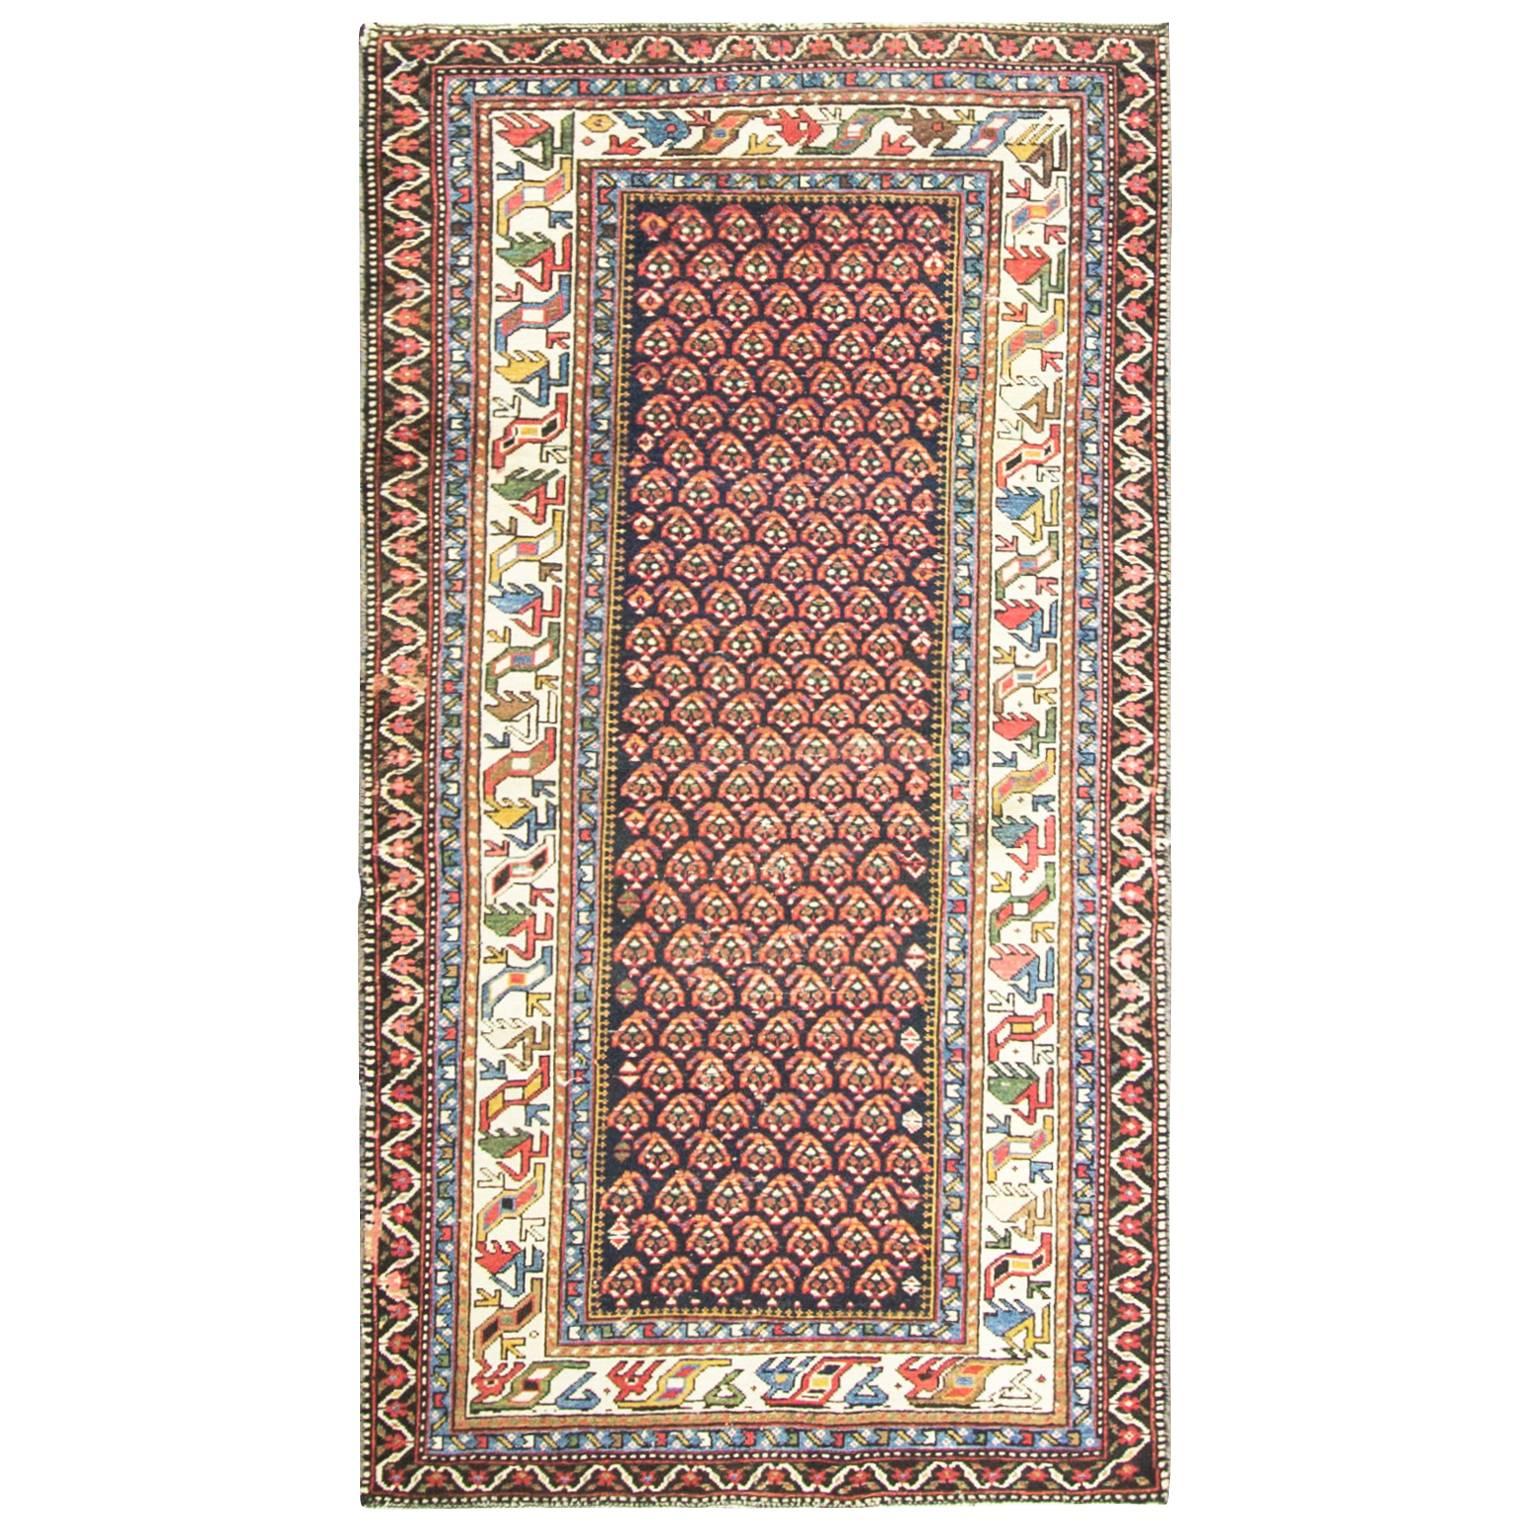  Antique Caucasian Rug, 3'4" x 6'5" Free Shipping For Sale